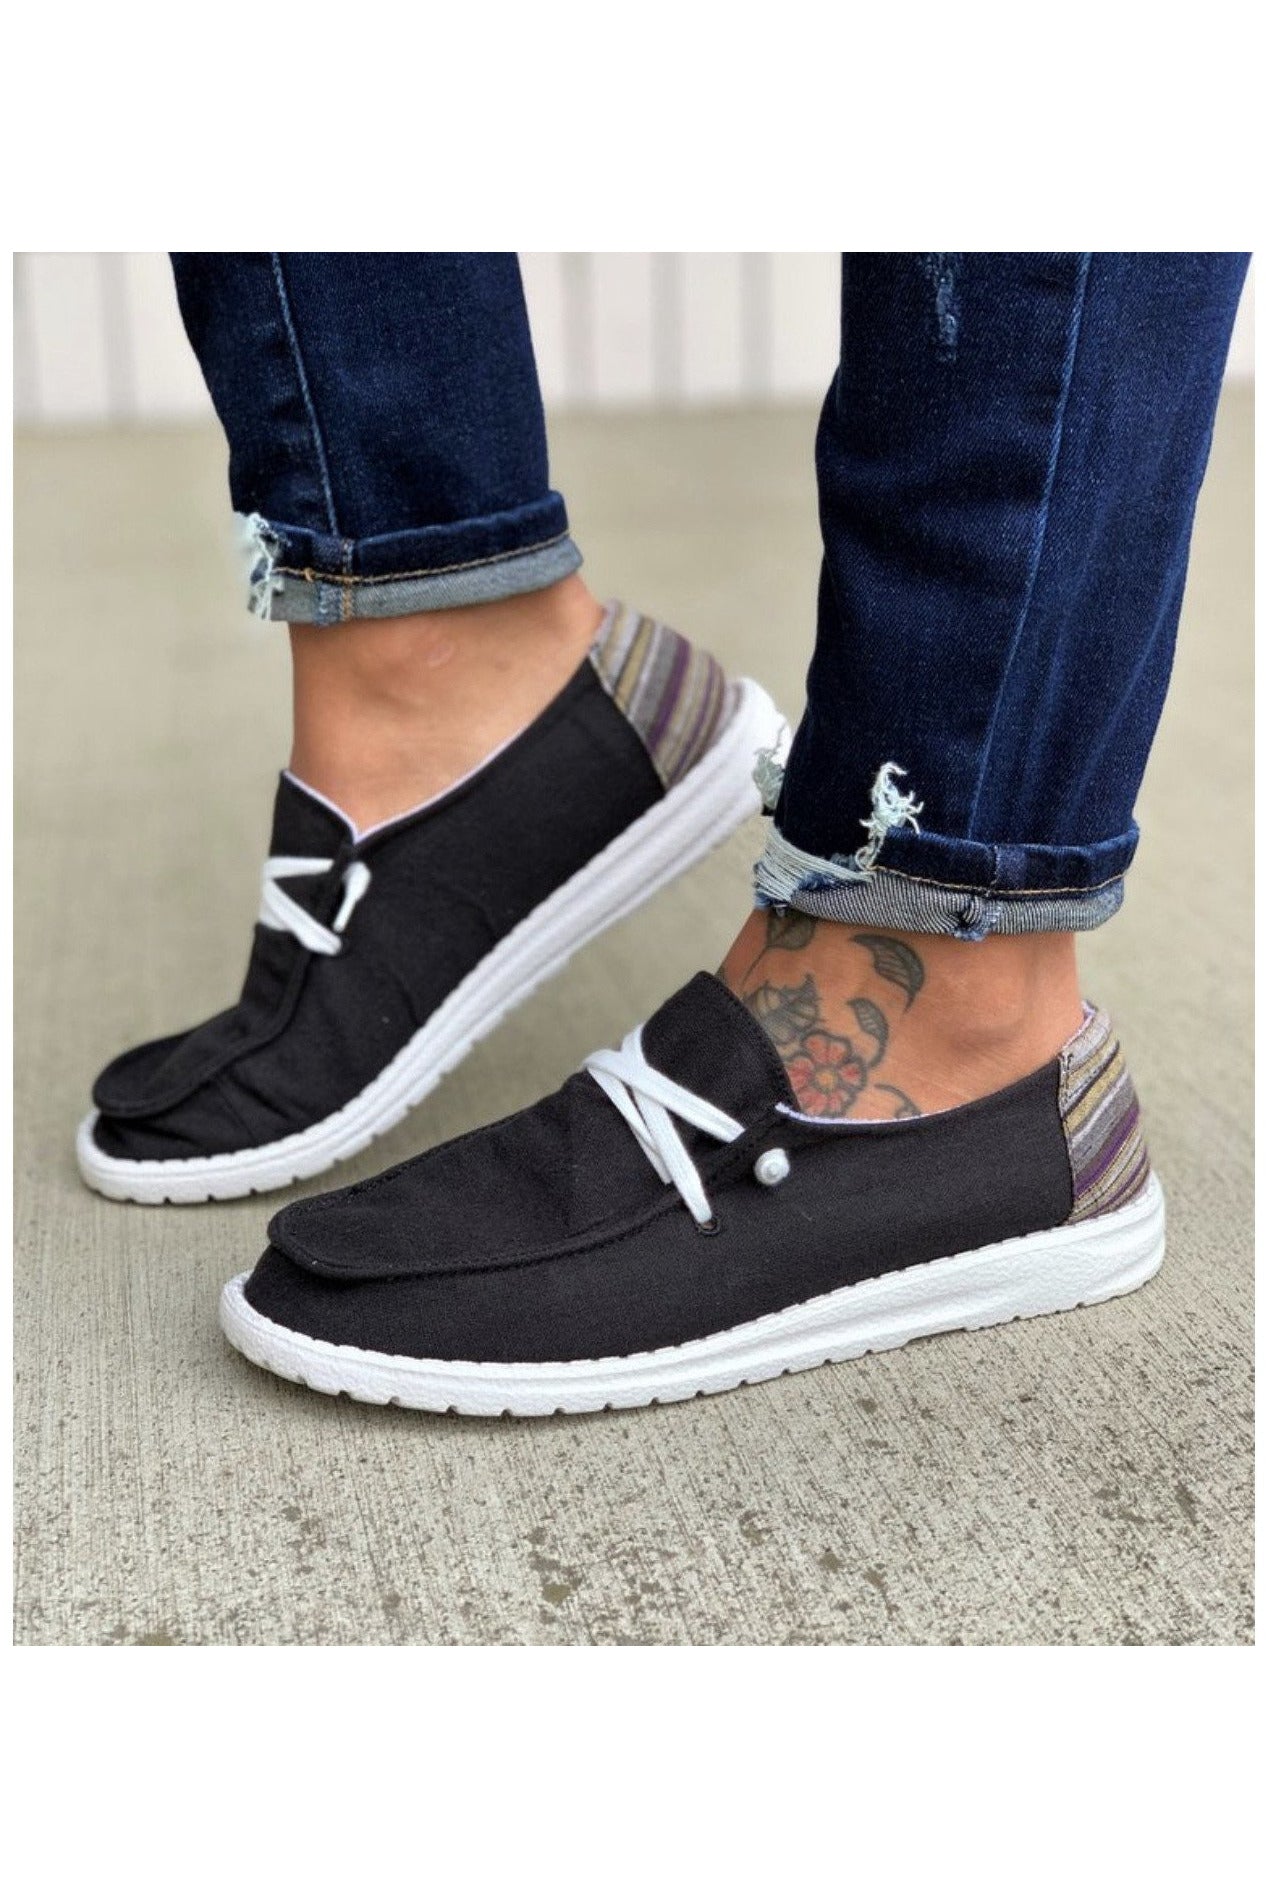 Black Lace up Sneakers